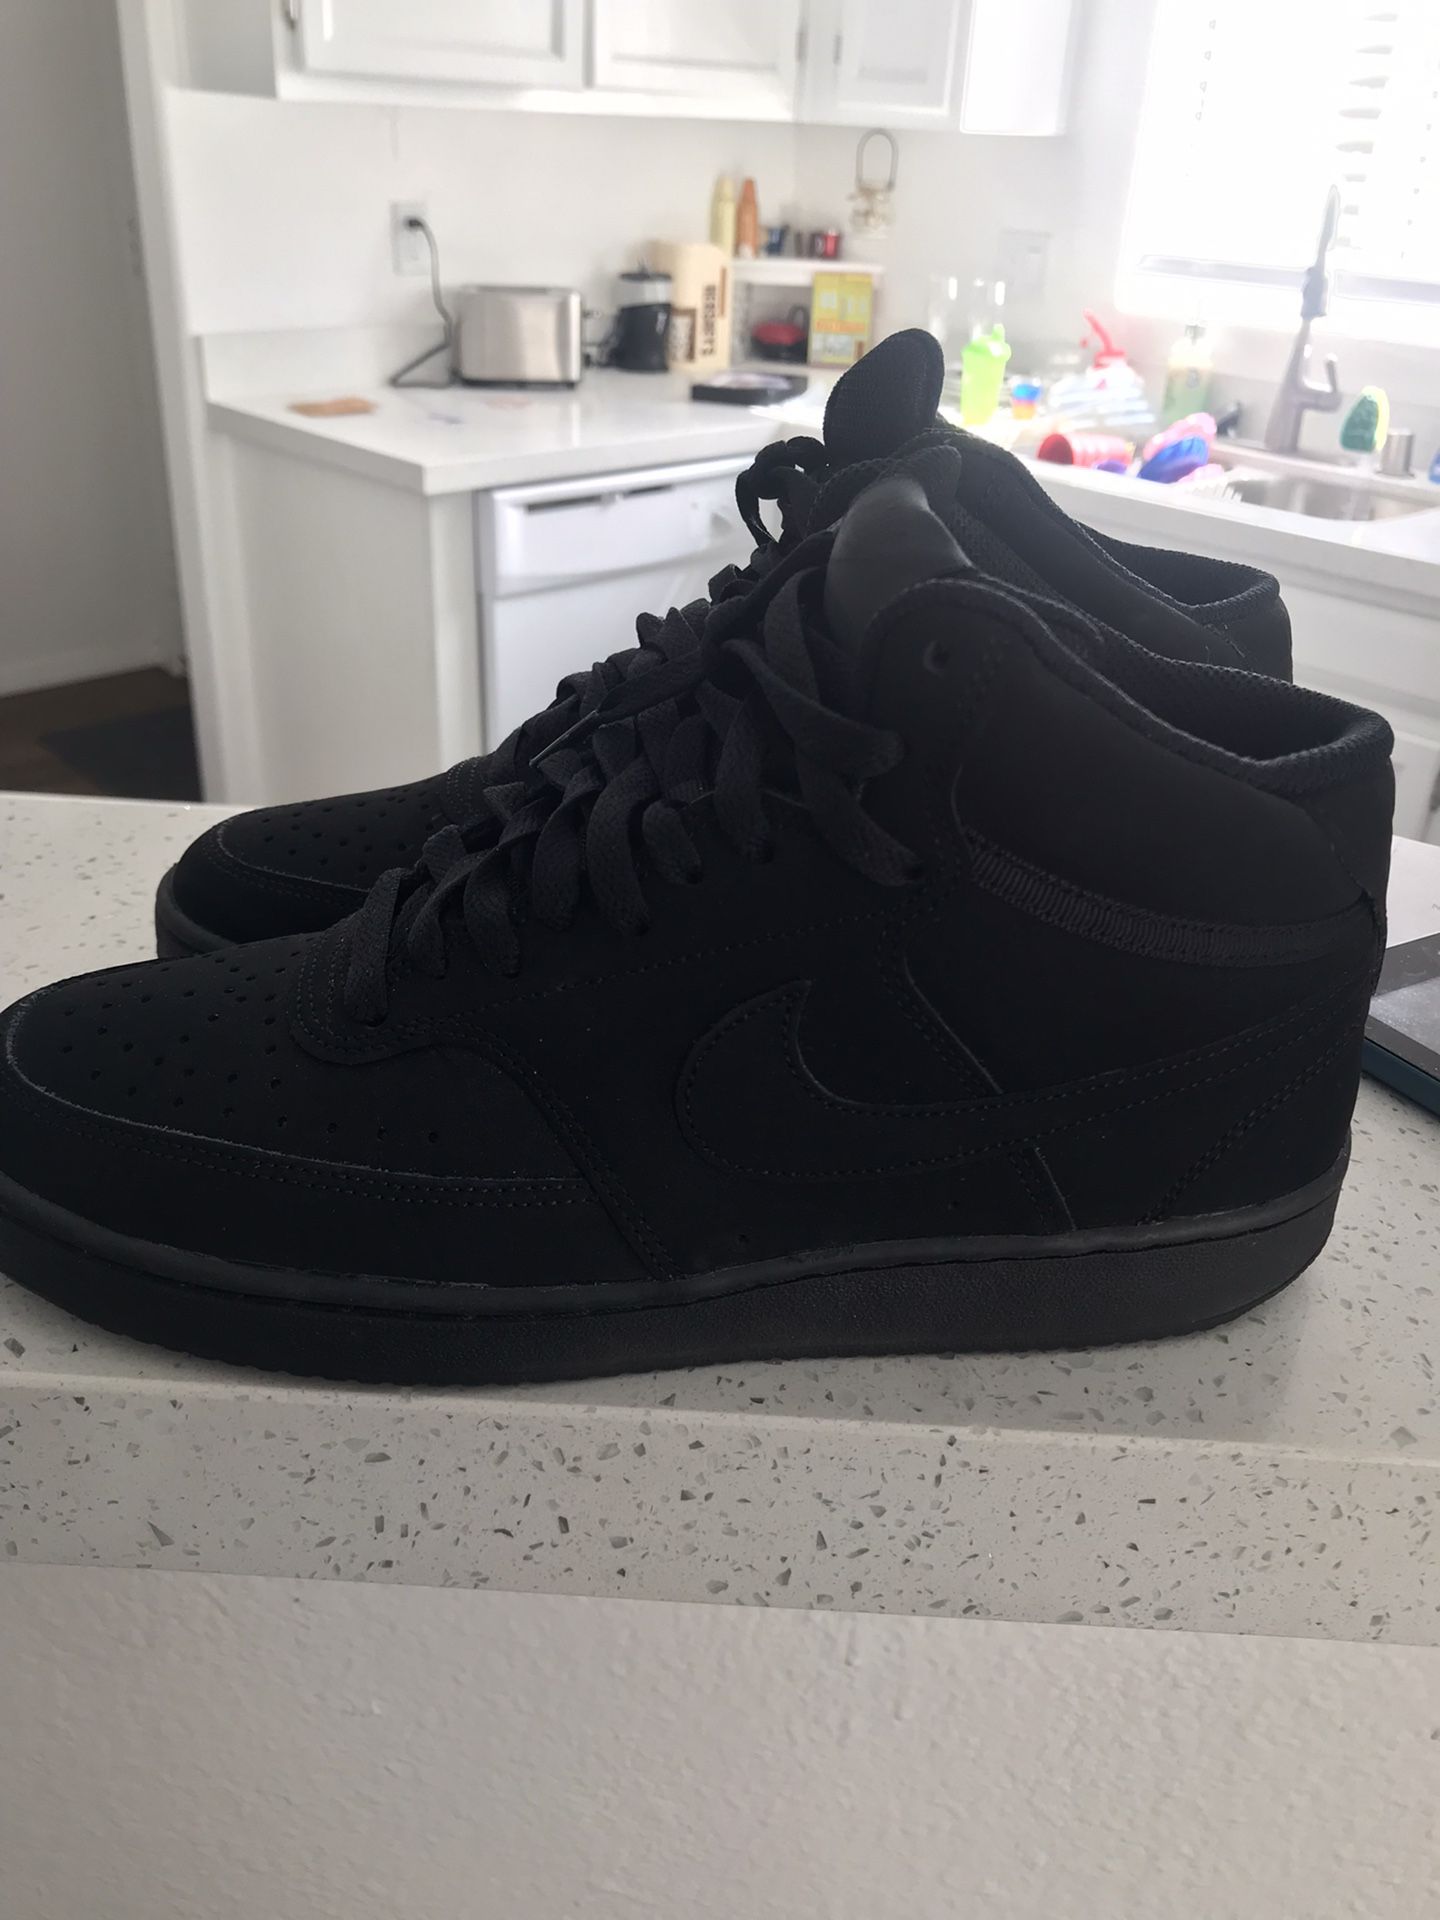 Nike Air Force 1's Black (Size 7 Mens) for Sale in Las Vegas, NV - OfferUp